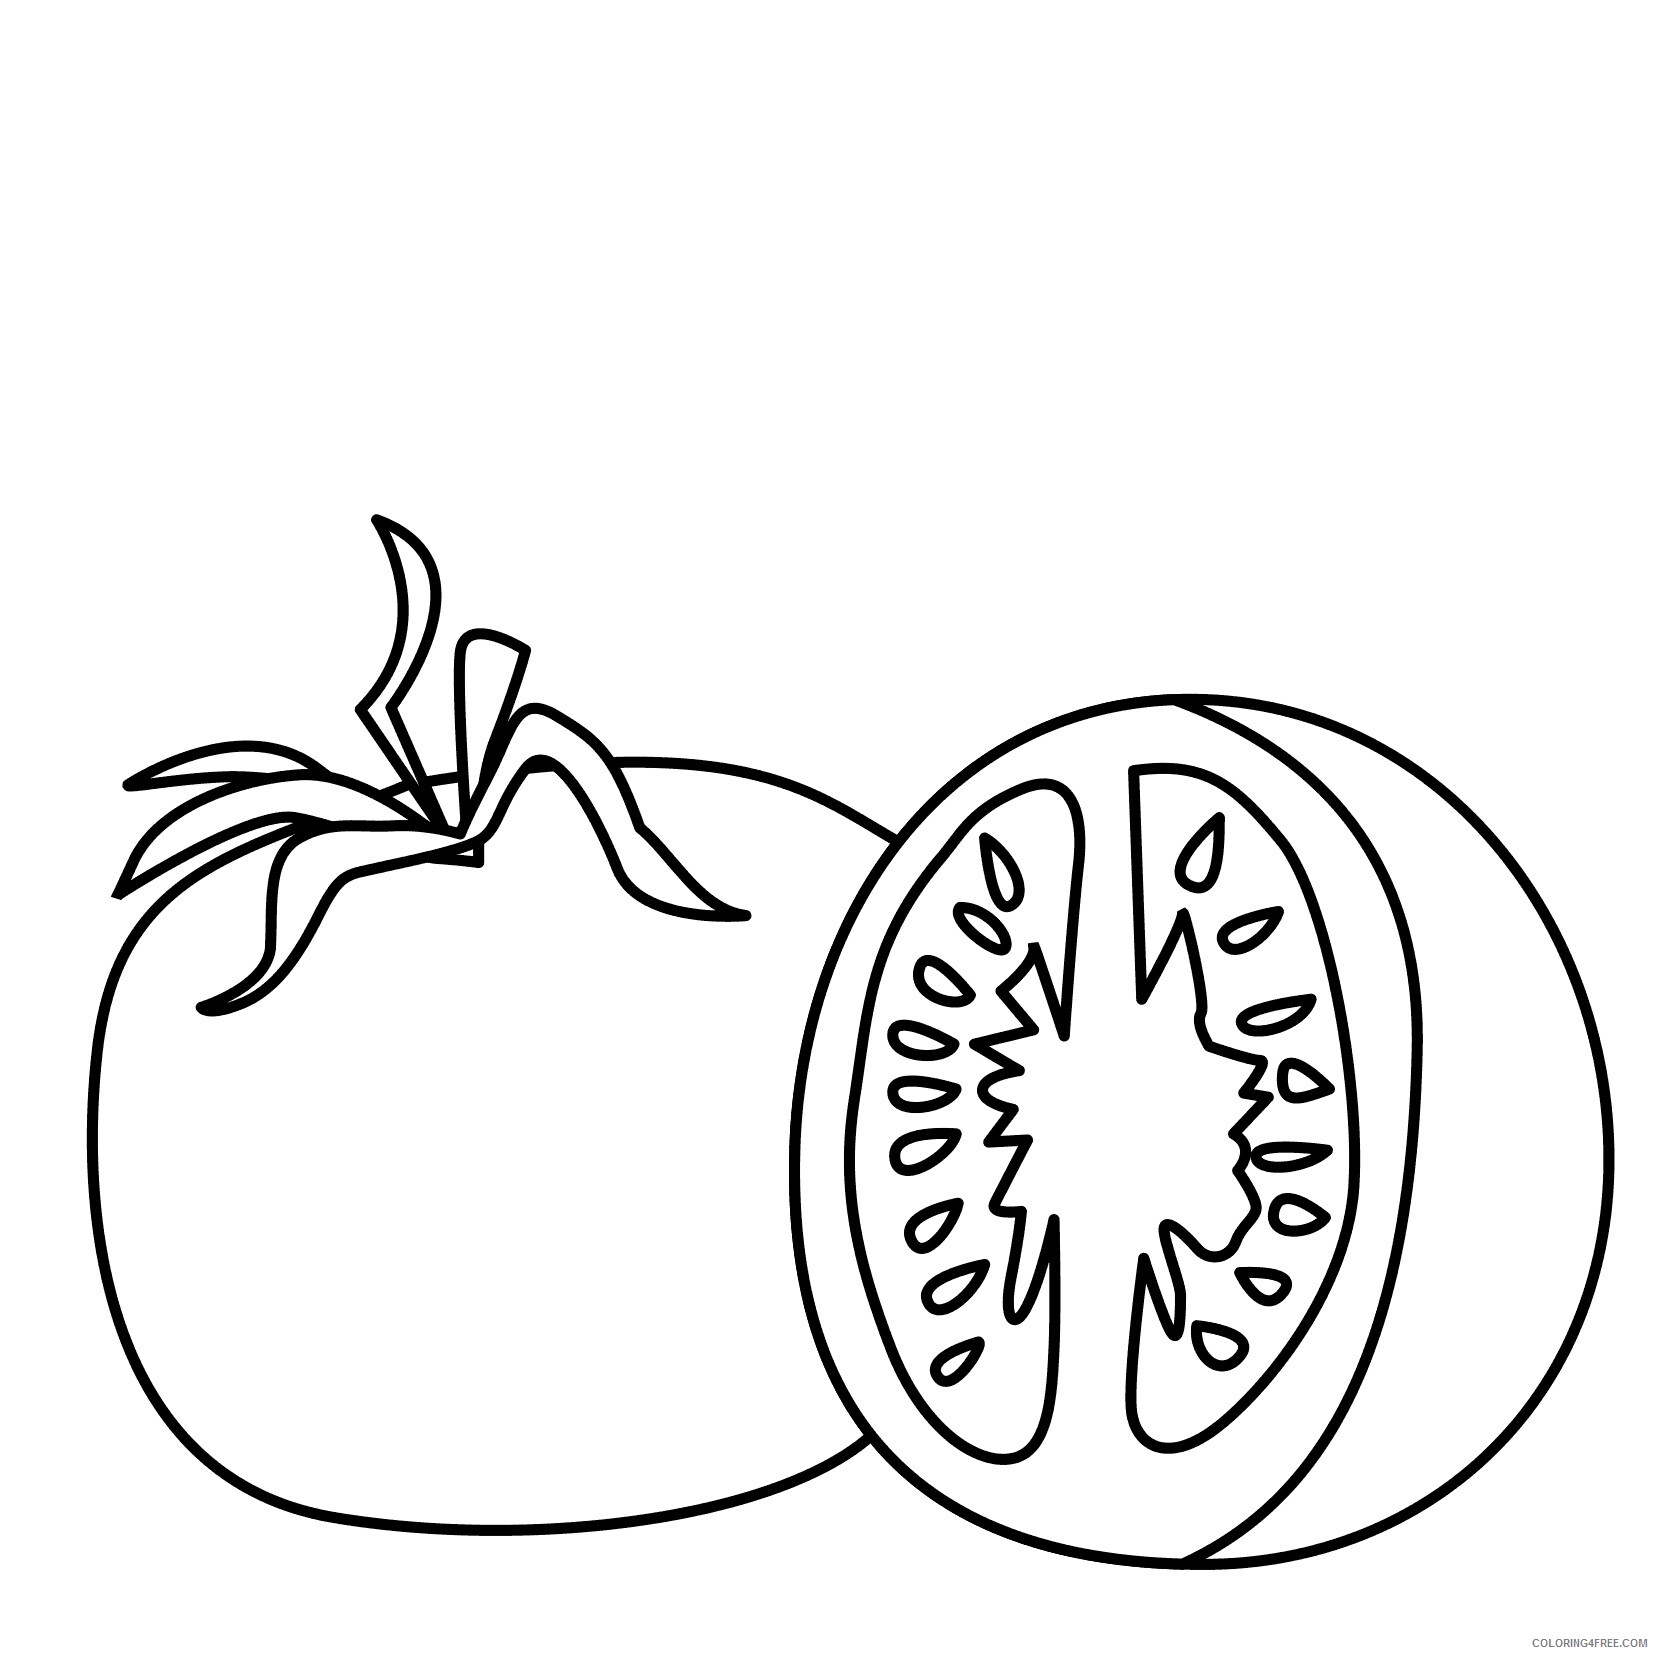 Tomato Coloring Pages Vegetables Food Tomato Printable 2021 762 Coloring4free